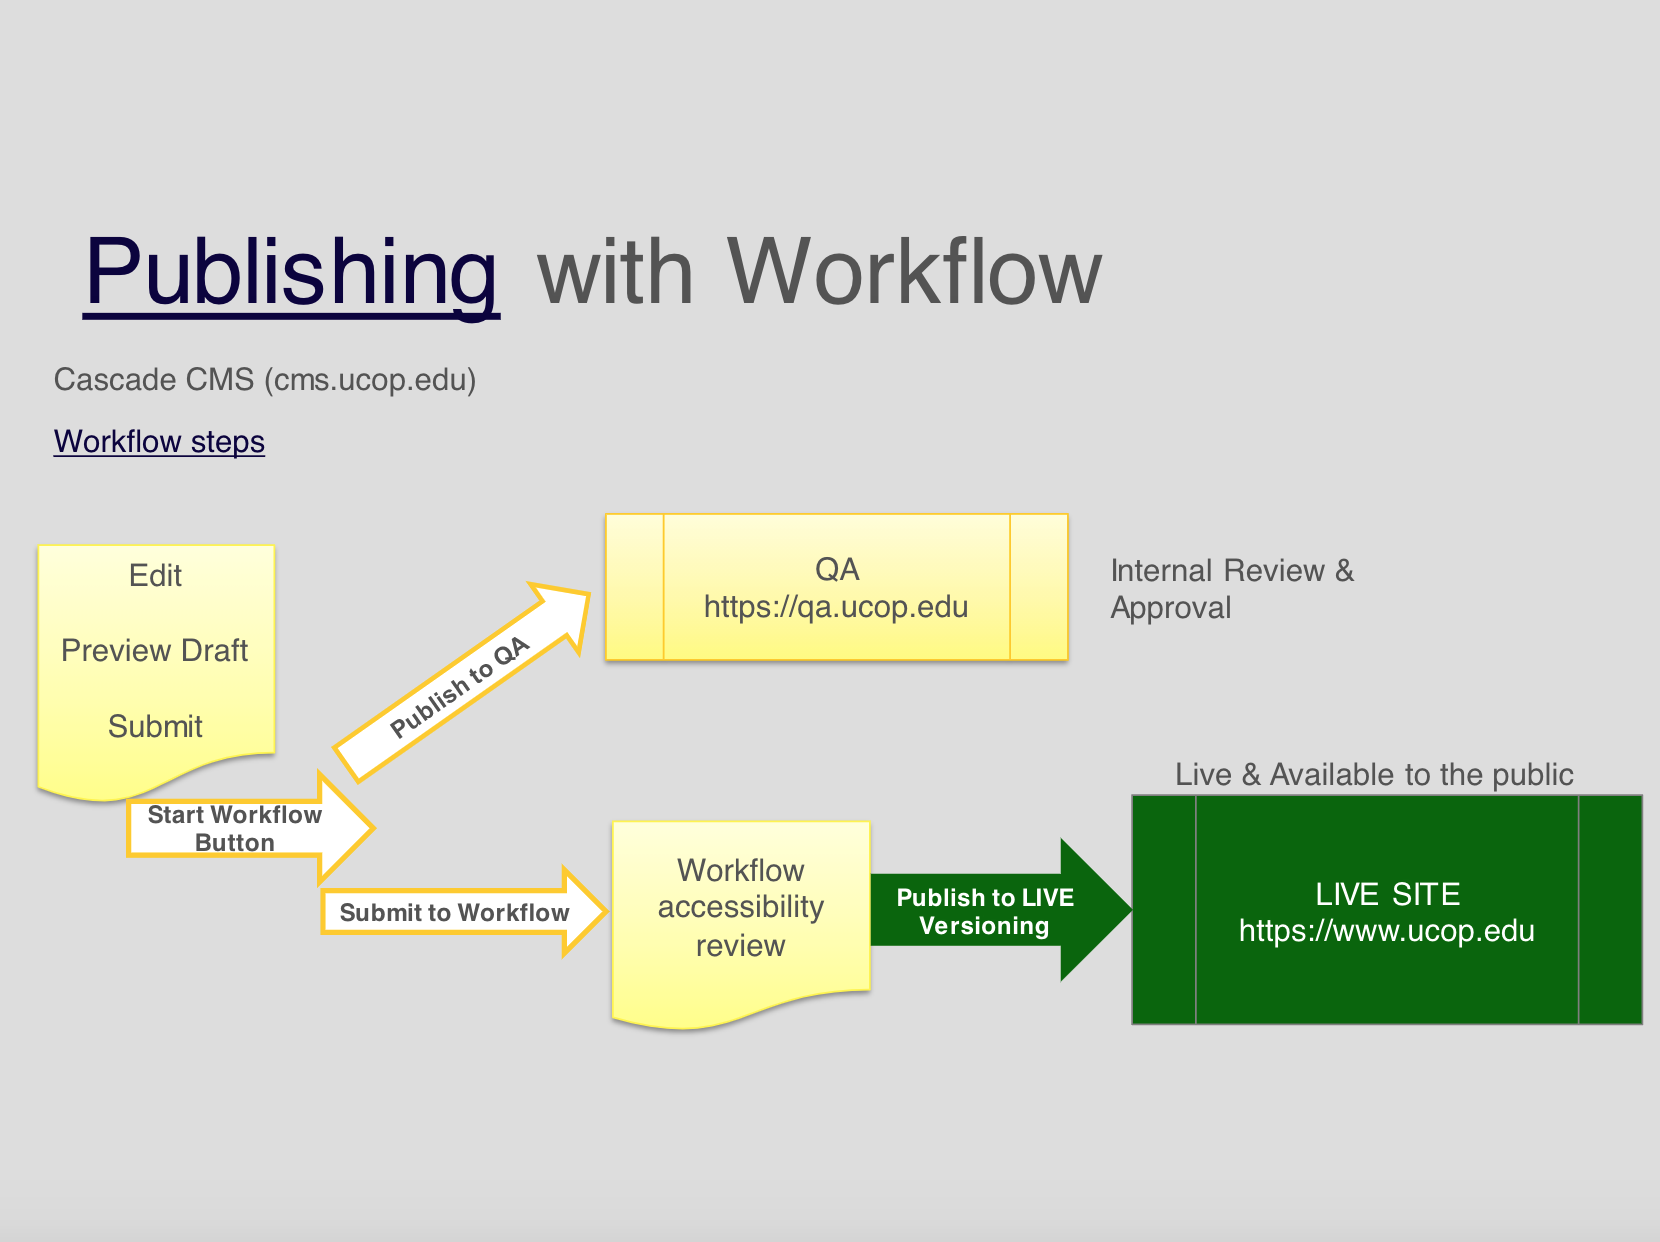 Publishing with workflow